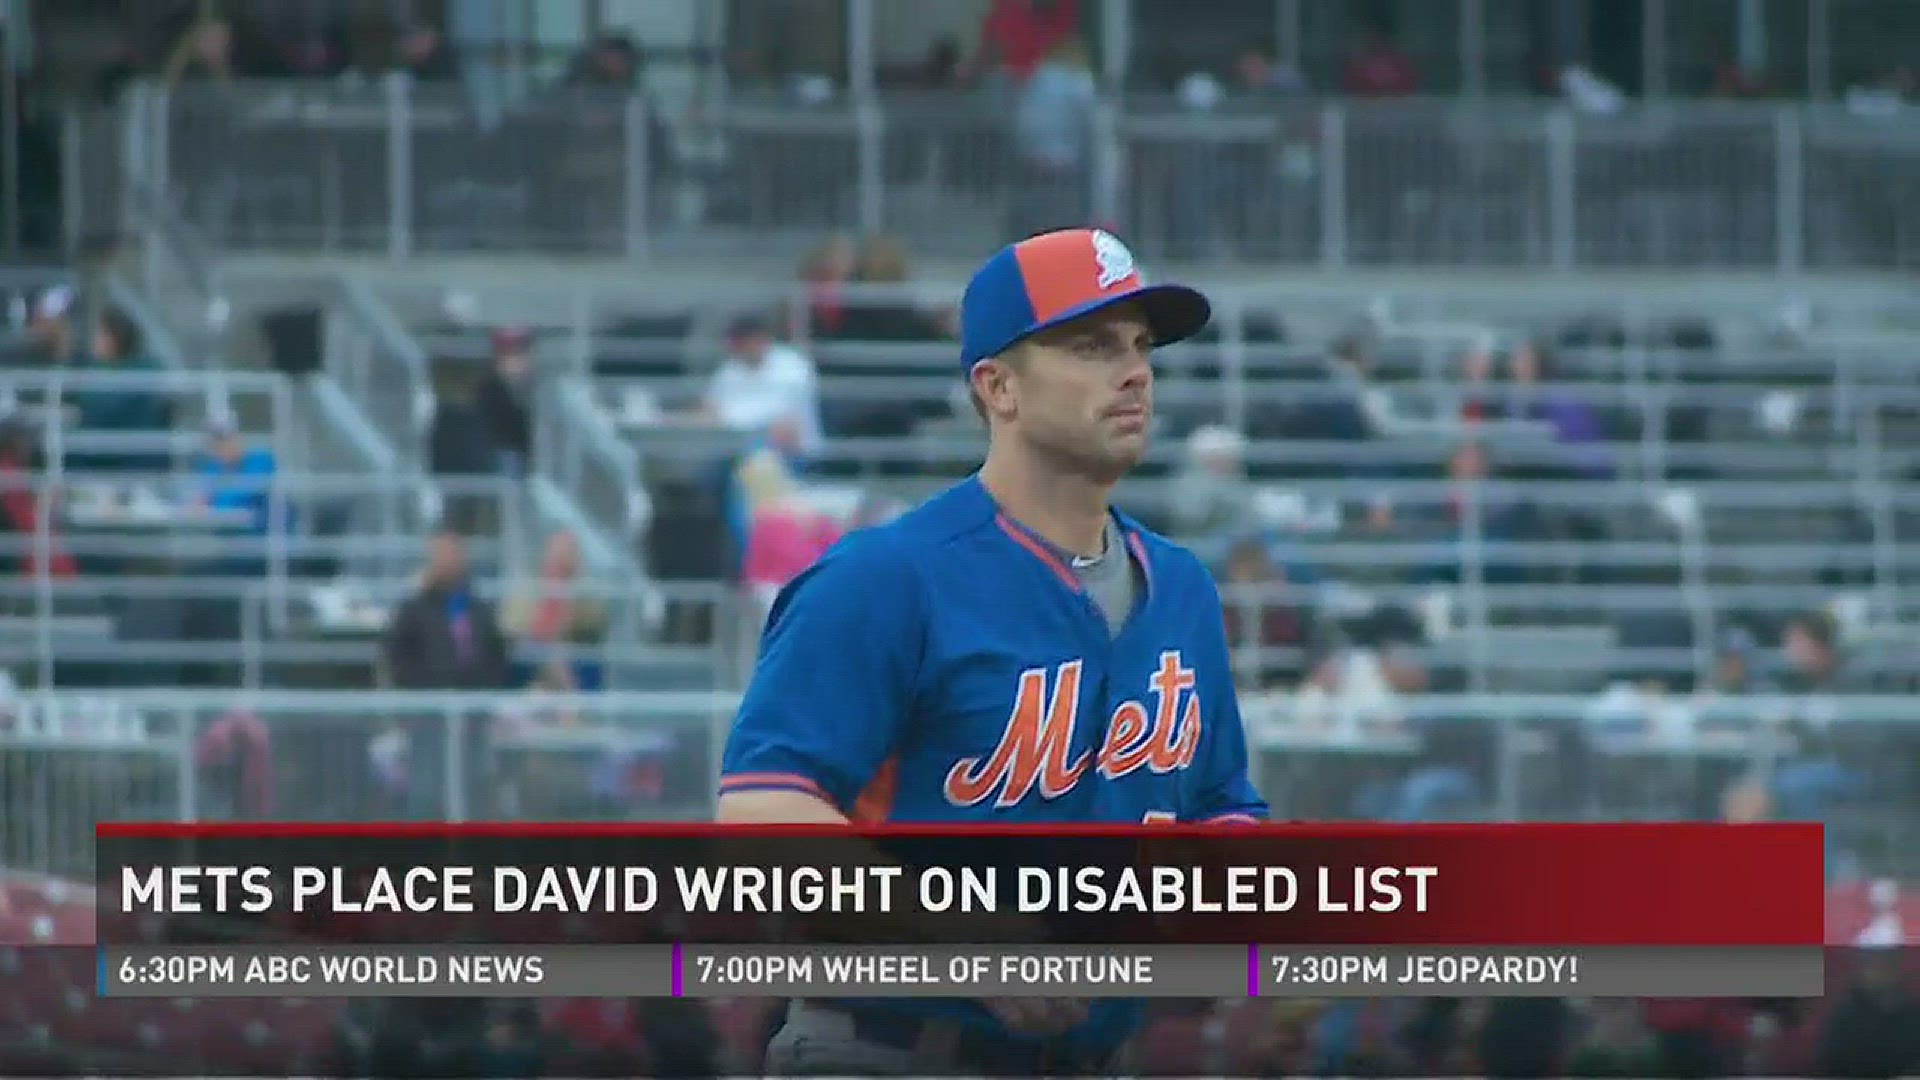 A David Wright wallpaper from - I like the New York Mets